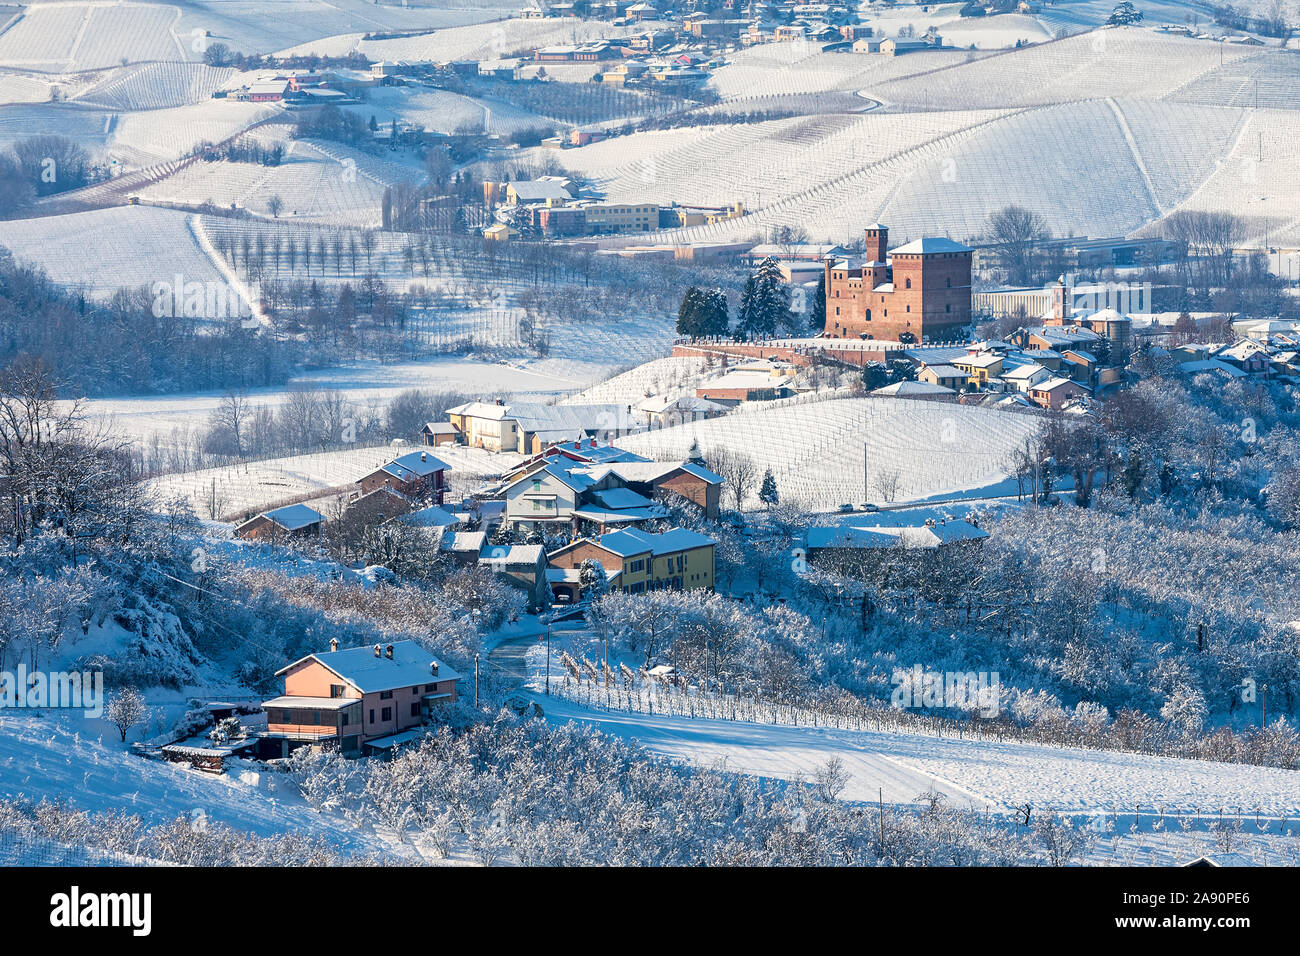 View of rural houses ans small medieval town of Grinzane Cavour on background on the hills covered in snow in Piedmont, Northern Italy. Stock Photo